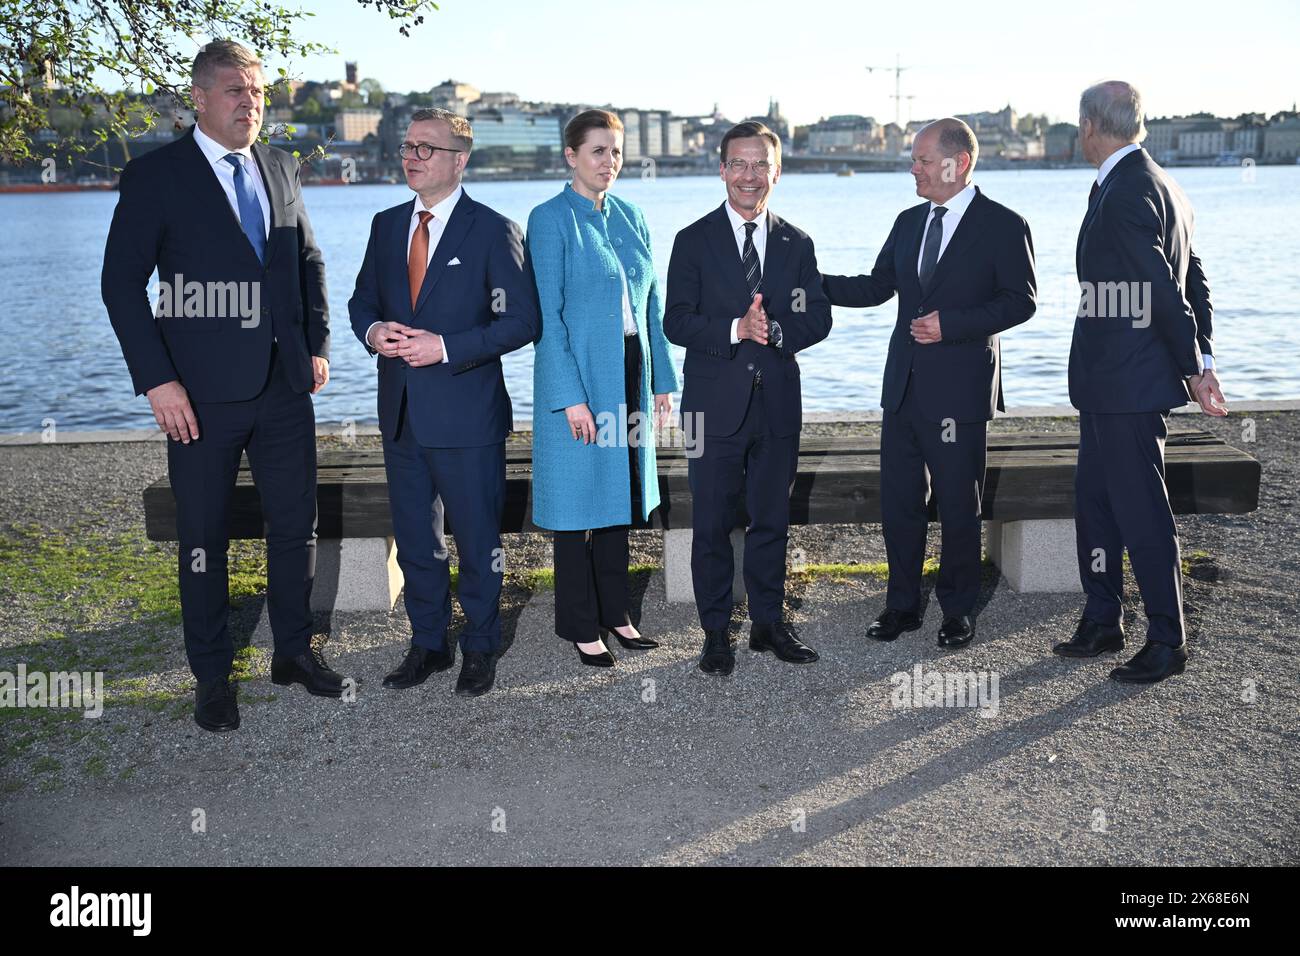 Stockholm, Sweden. 13th May, 2024. STOCKHOLM, SWEDEN 20240513(L-R) Icelandic Prime Minister Bjarni Benediktsson, Finnish Prime Minister Petteri Orpo, Danish Prime Minister Mette Frederiksen, Swedish Prime Minister Ulf Kristersson, German Chancellor Olaf Scholz and Norwegian Prime Minister Jonas Gahr Støre pose for a group photo after a joint news conference at Skeppsholmen in Stockholm, Sweden, May 13, 2024, during a two-day Nordic prime minister's meeting, on security and competitiveness. Photo: Pontus Lundahl/TT/Code 10050 Credit: TT News Agency/Alamy Live News Stock Photo